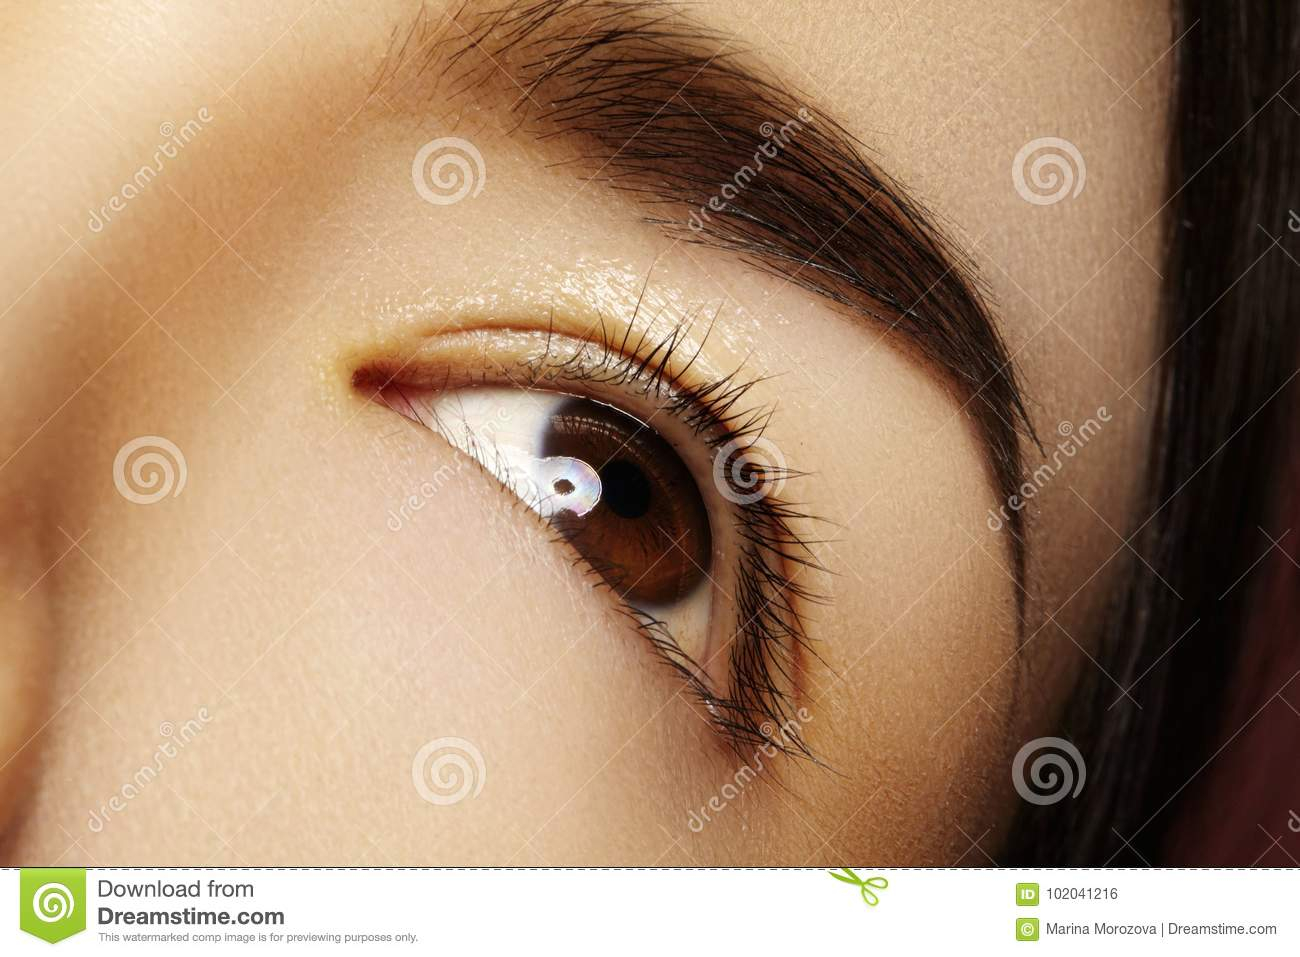 Asian Eyes Makeup Close Up Asian Eye With Clean Makeup Perfect Shape Eyebrows